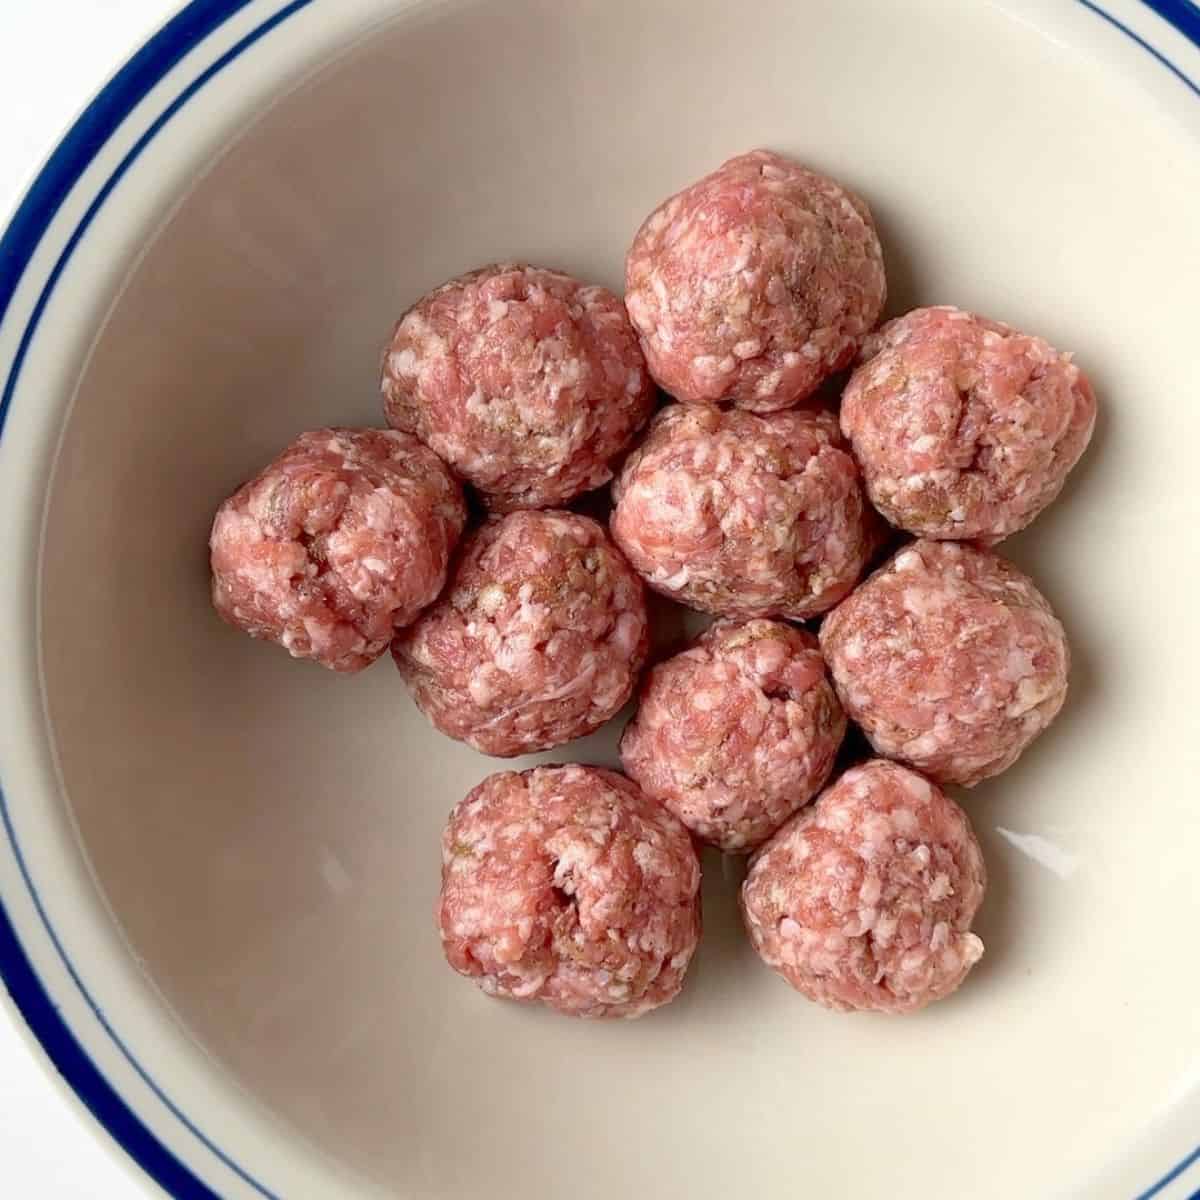 Balls of rolled sausage in a large bowl.